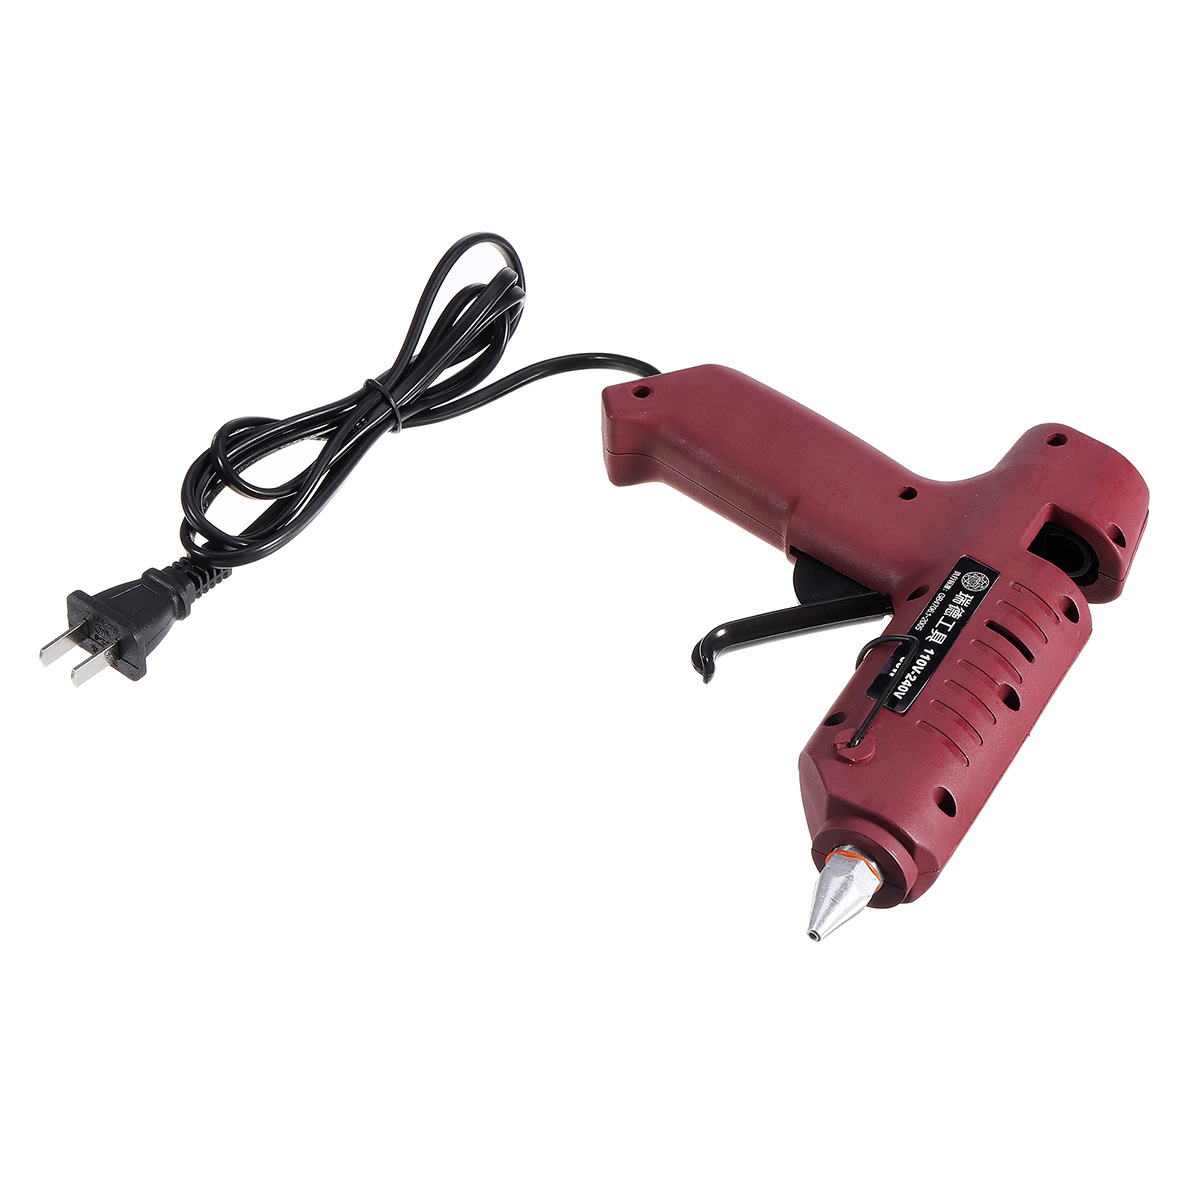 CREST-Professional-Red-12V-Lithium-Electric-Power-Drill-Set-with-Plastic-Toolbox-1713142